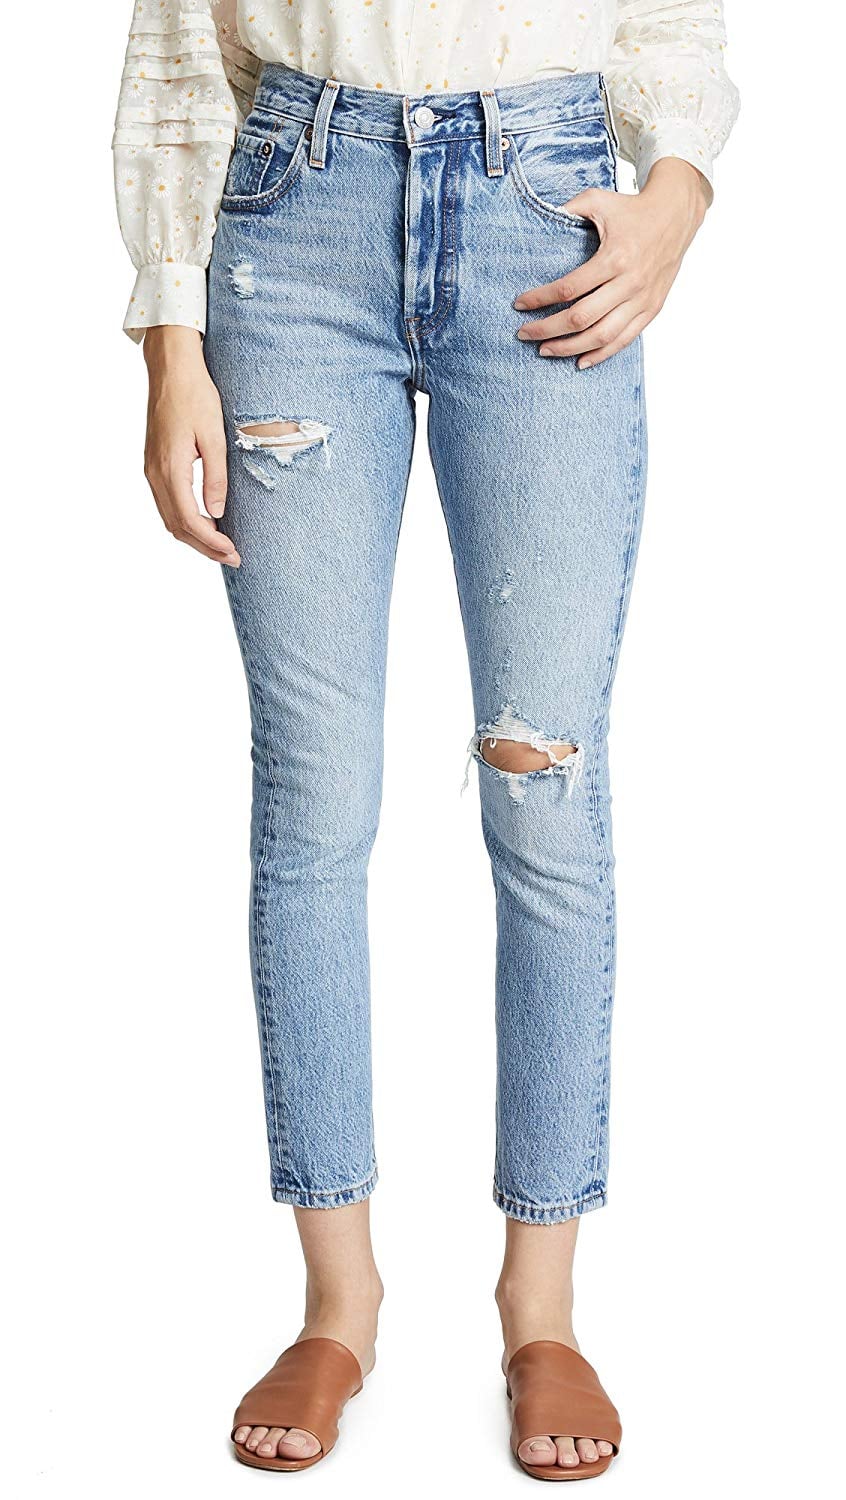 jeans top online shopping amazon